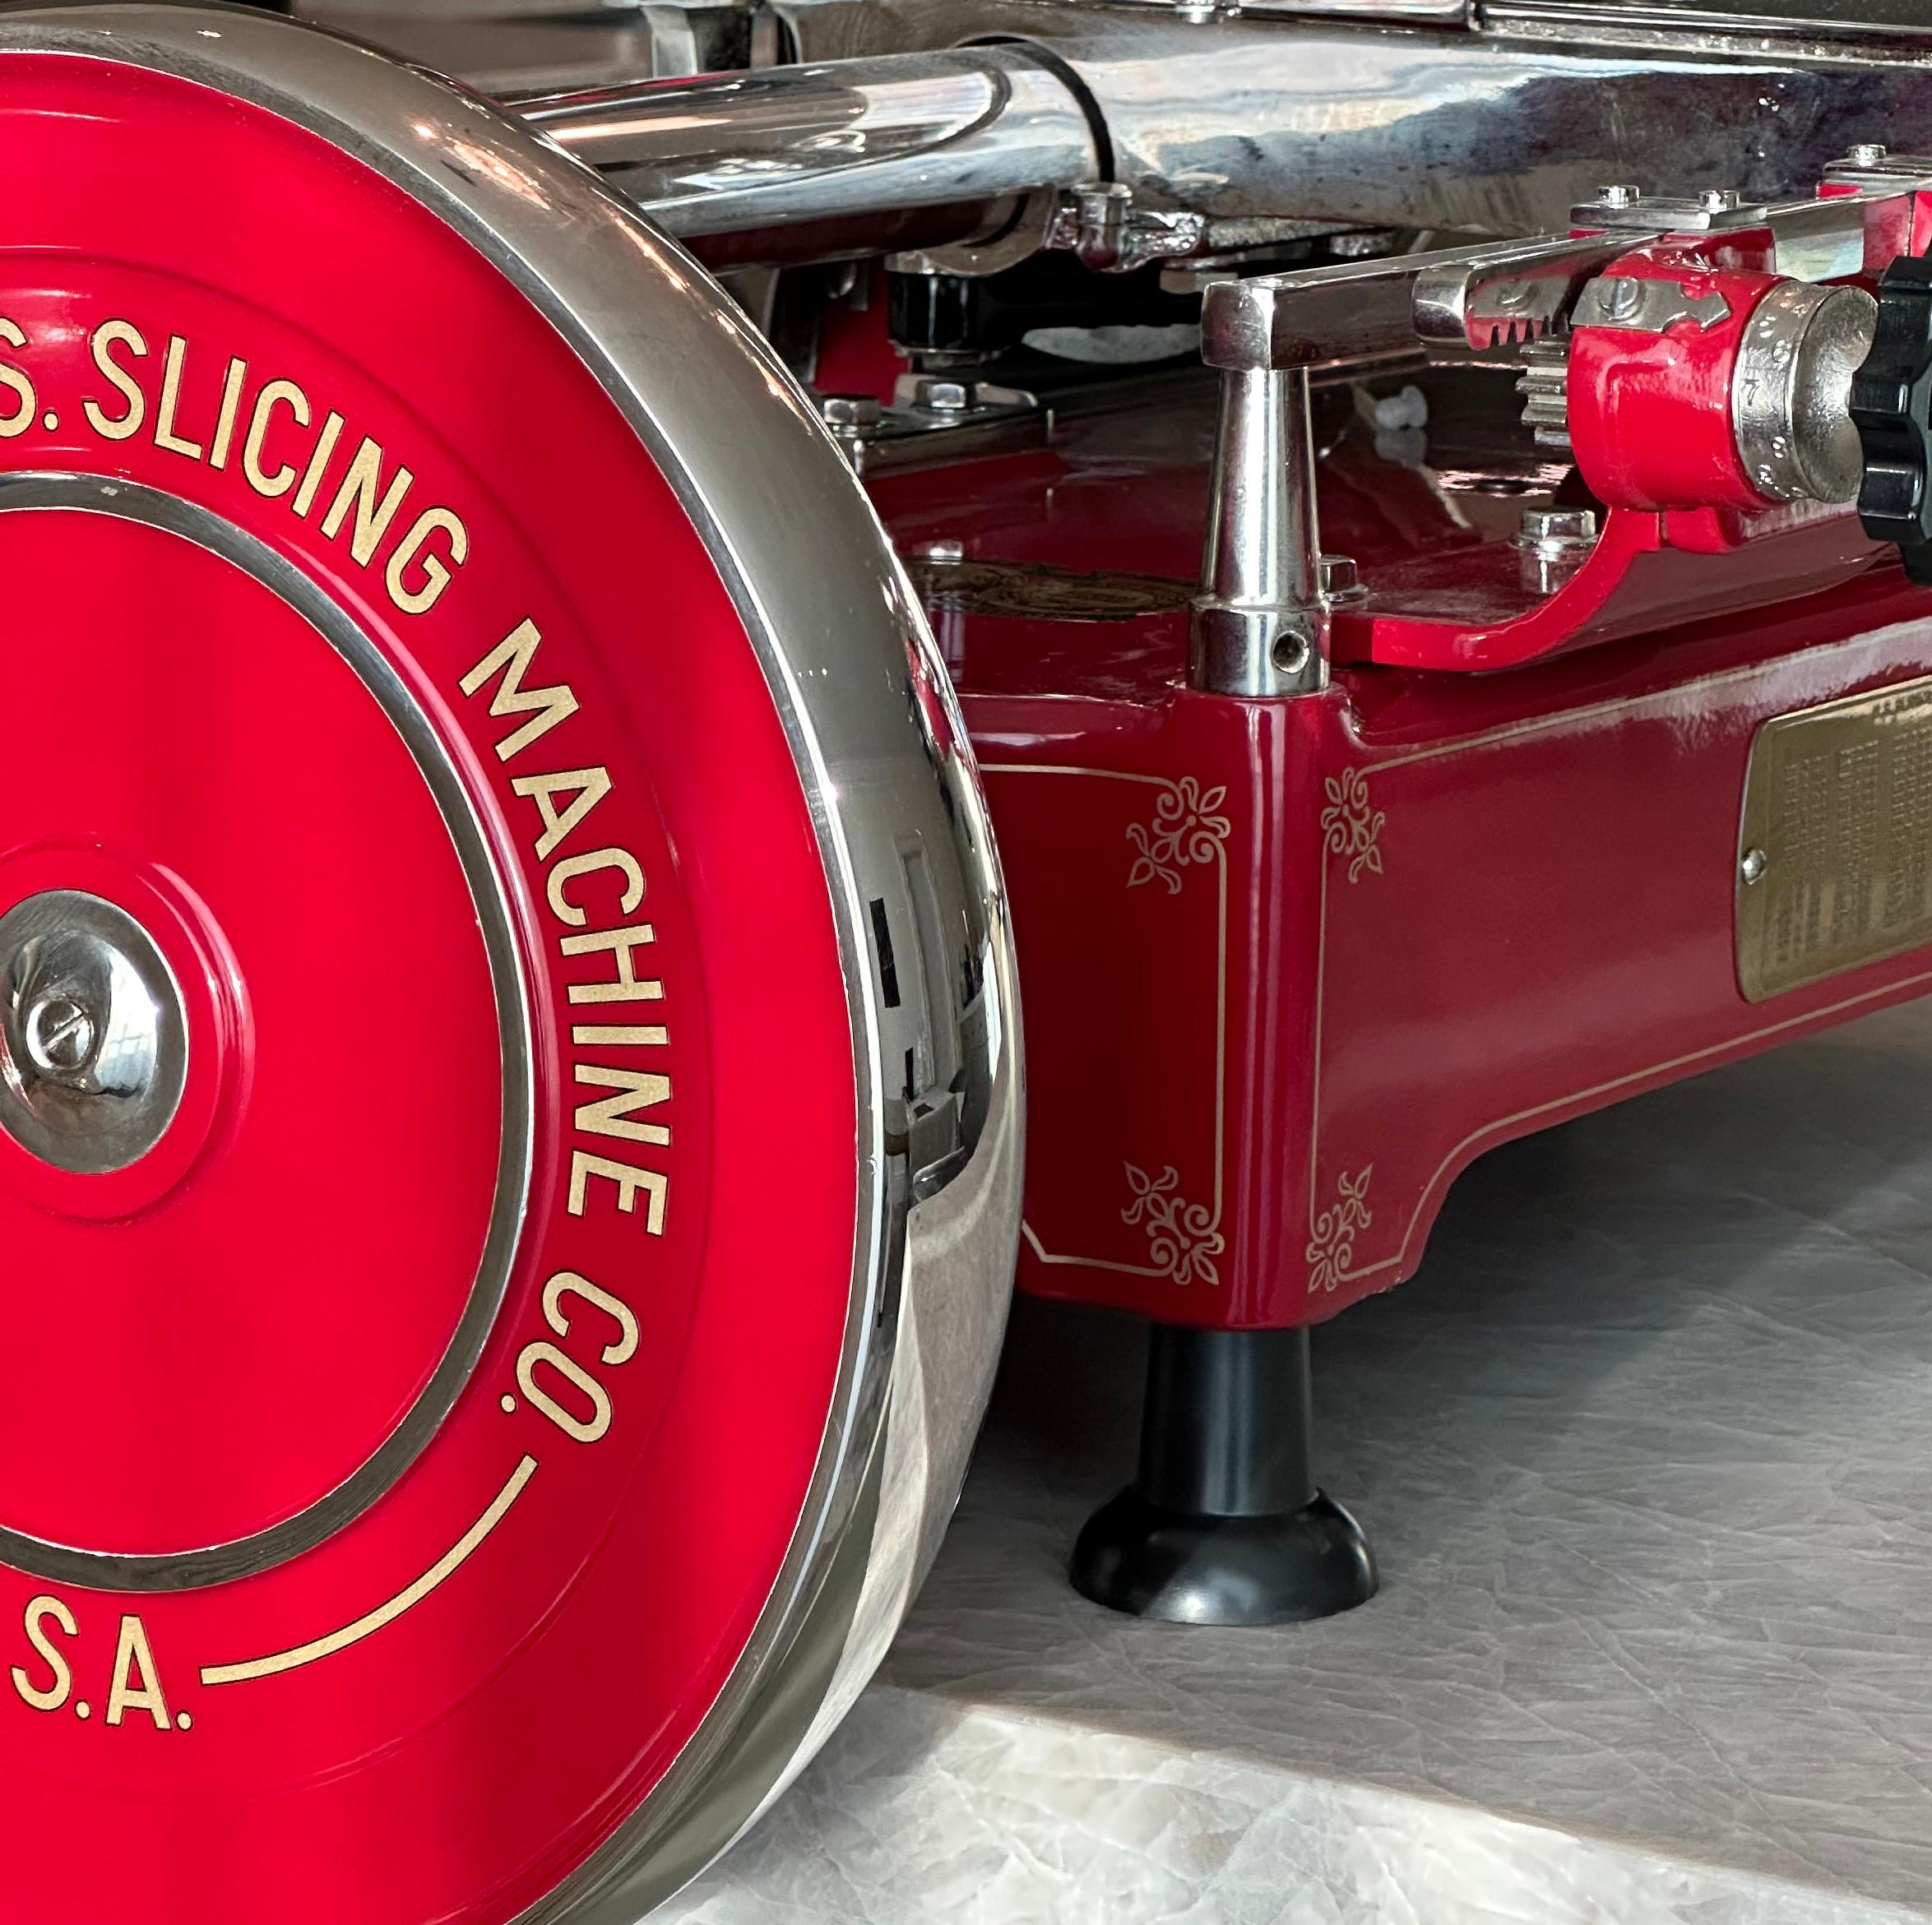 A fully restored and original 1930s Berkel red enamel flywheel meat slicer.

Experience the pinnacle of antique culinary machinery with this impeccably restored Berkel meat slicer. All elements of this piece have been meticulously restored to the